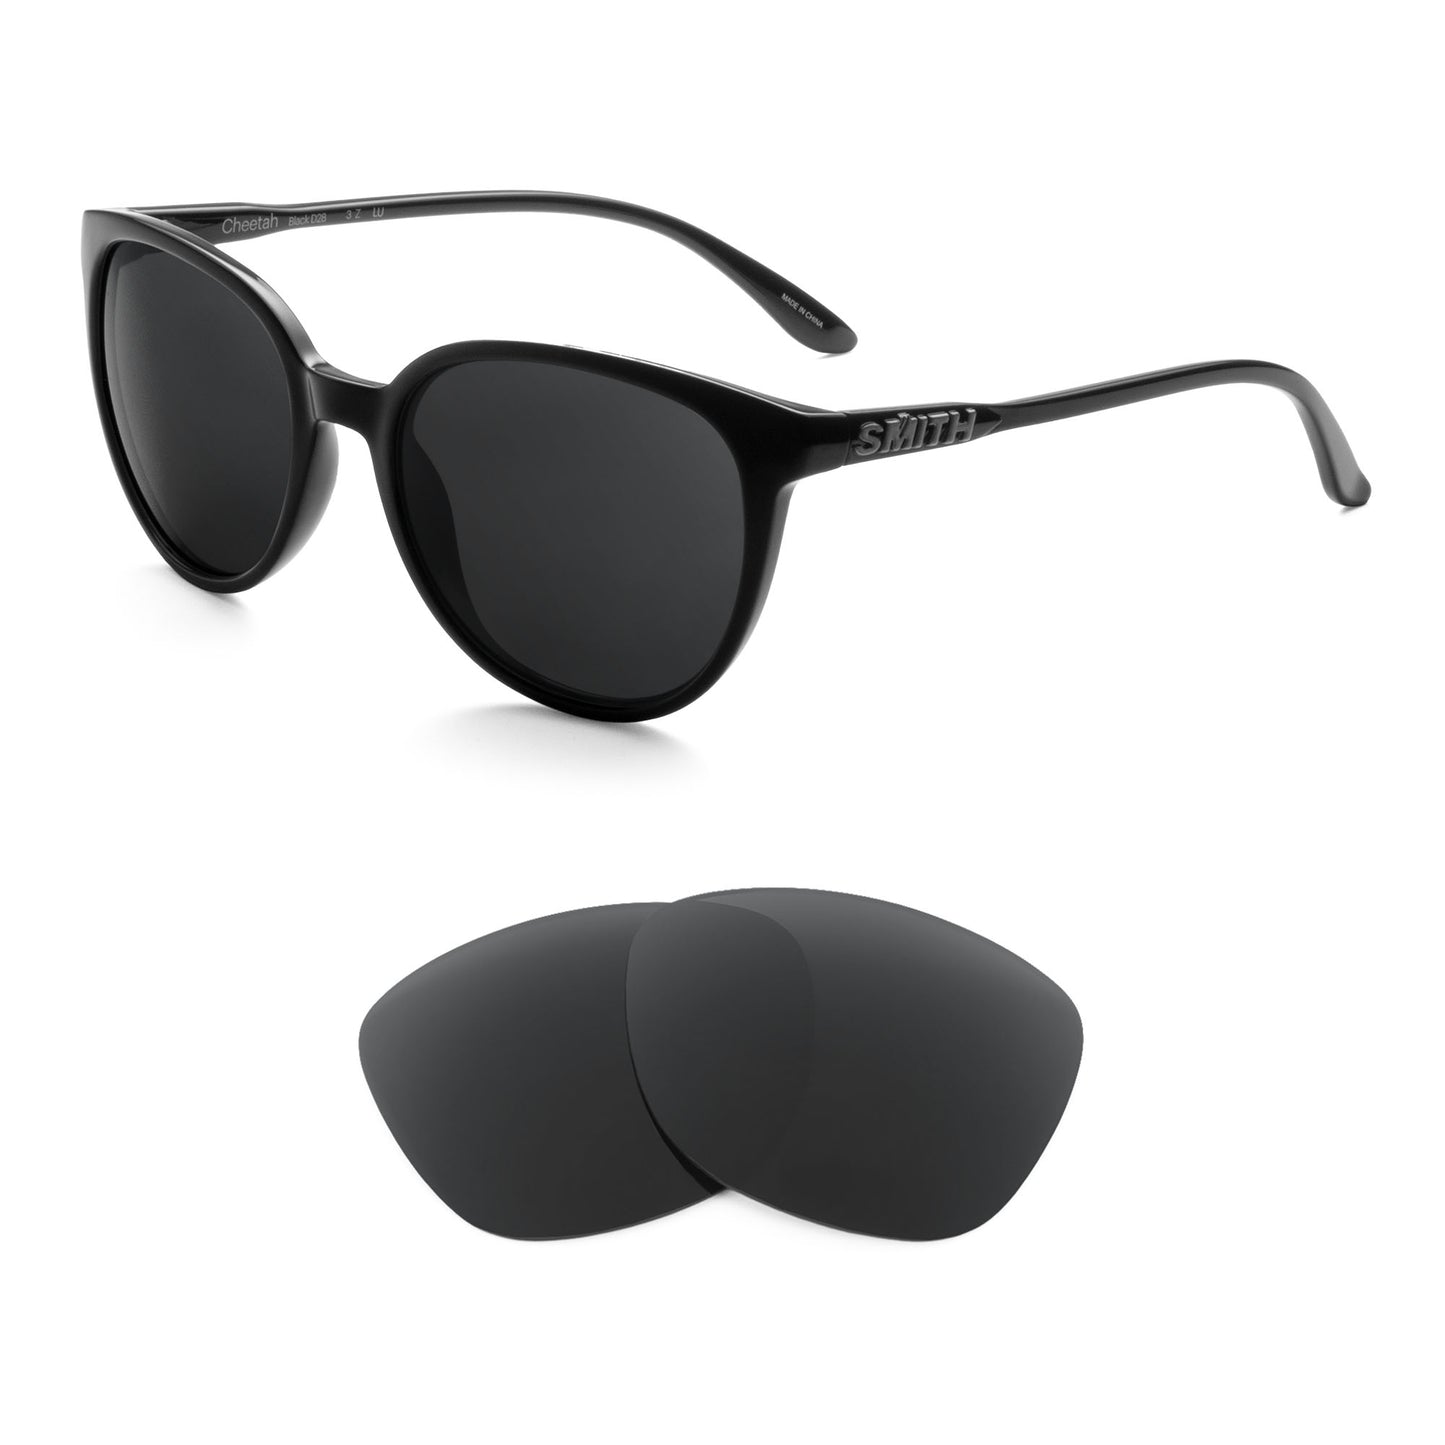 Smith Cheetah sunglasses with replacement lenses